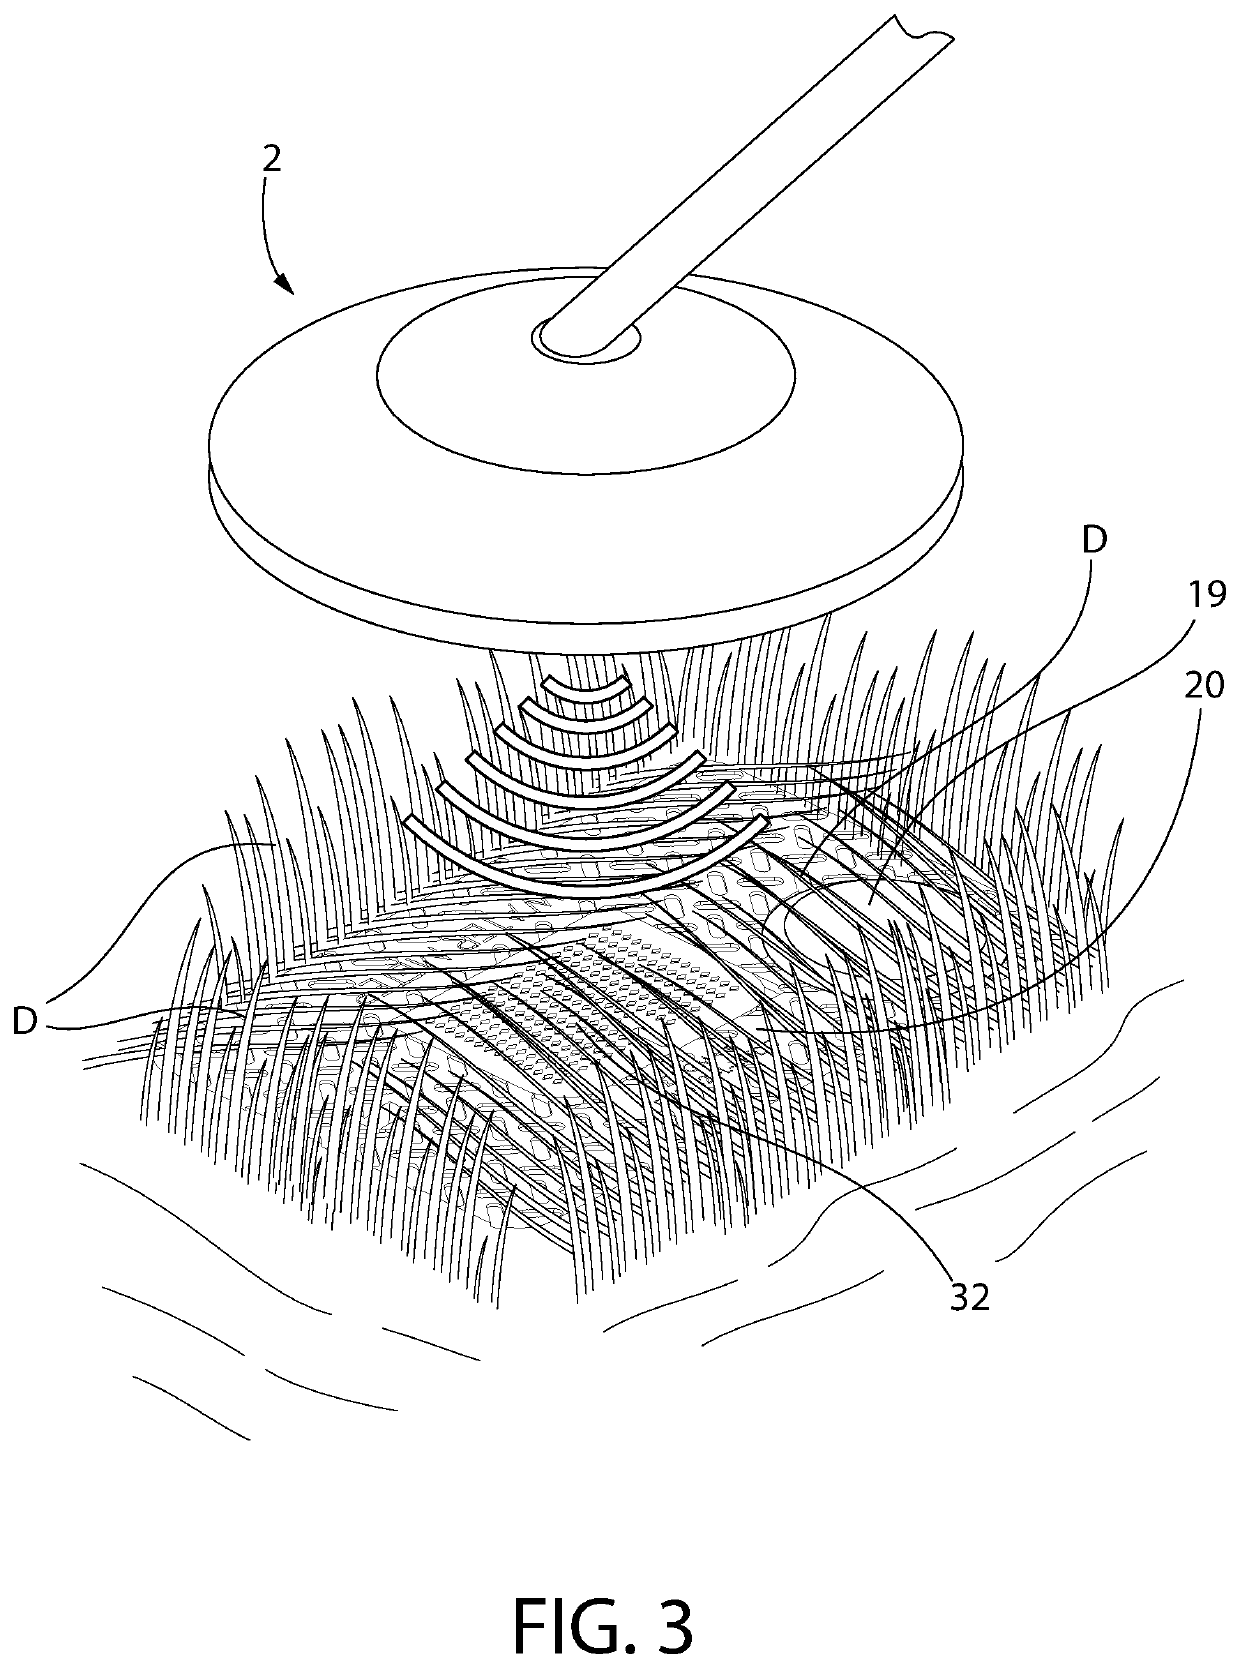 Rotomolded reinforced concrete meter box lid and method of making same